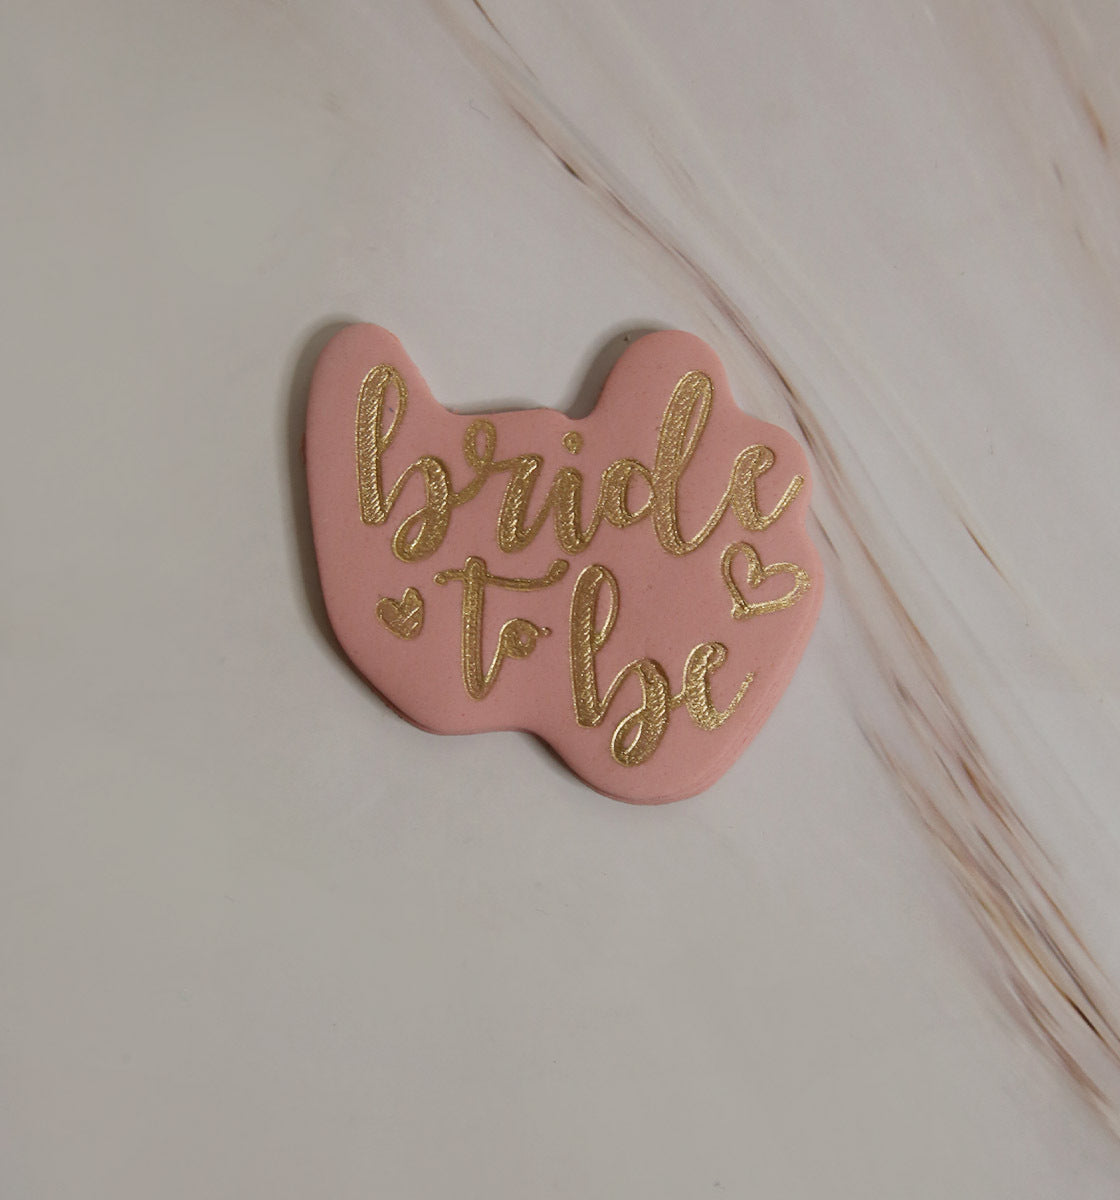 Bride to be - Cake Stamp